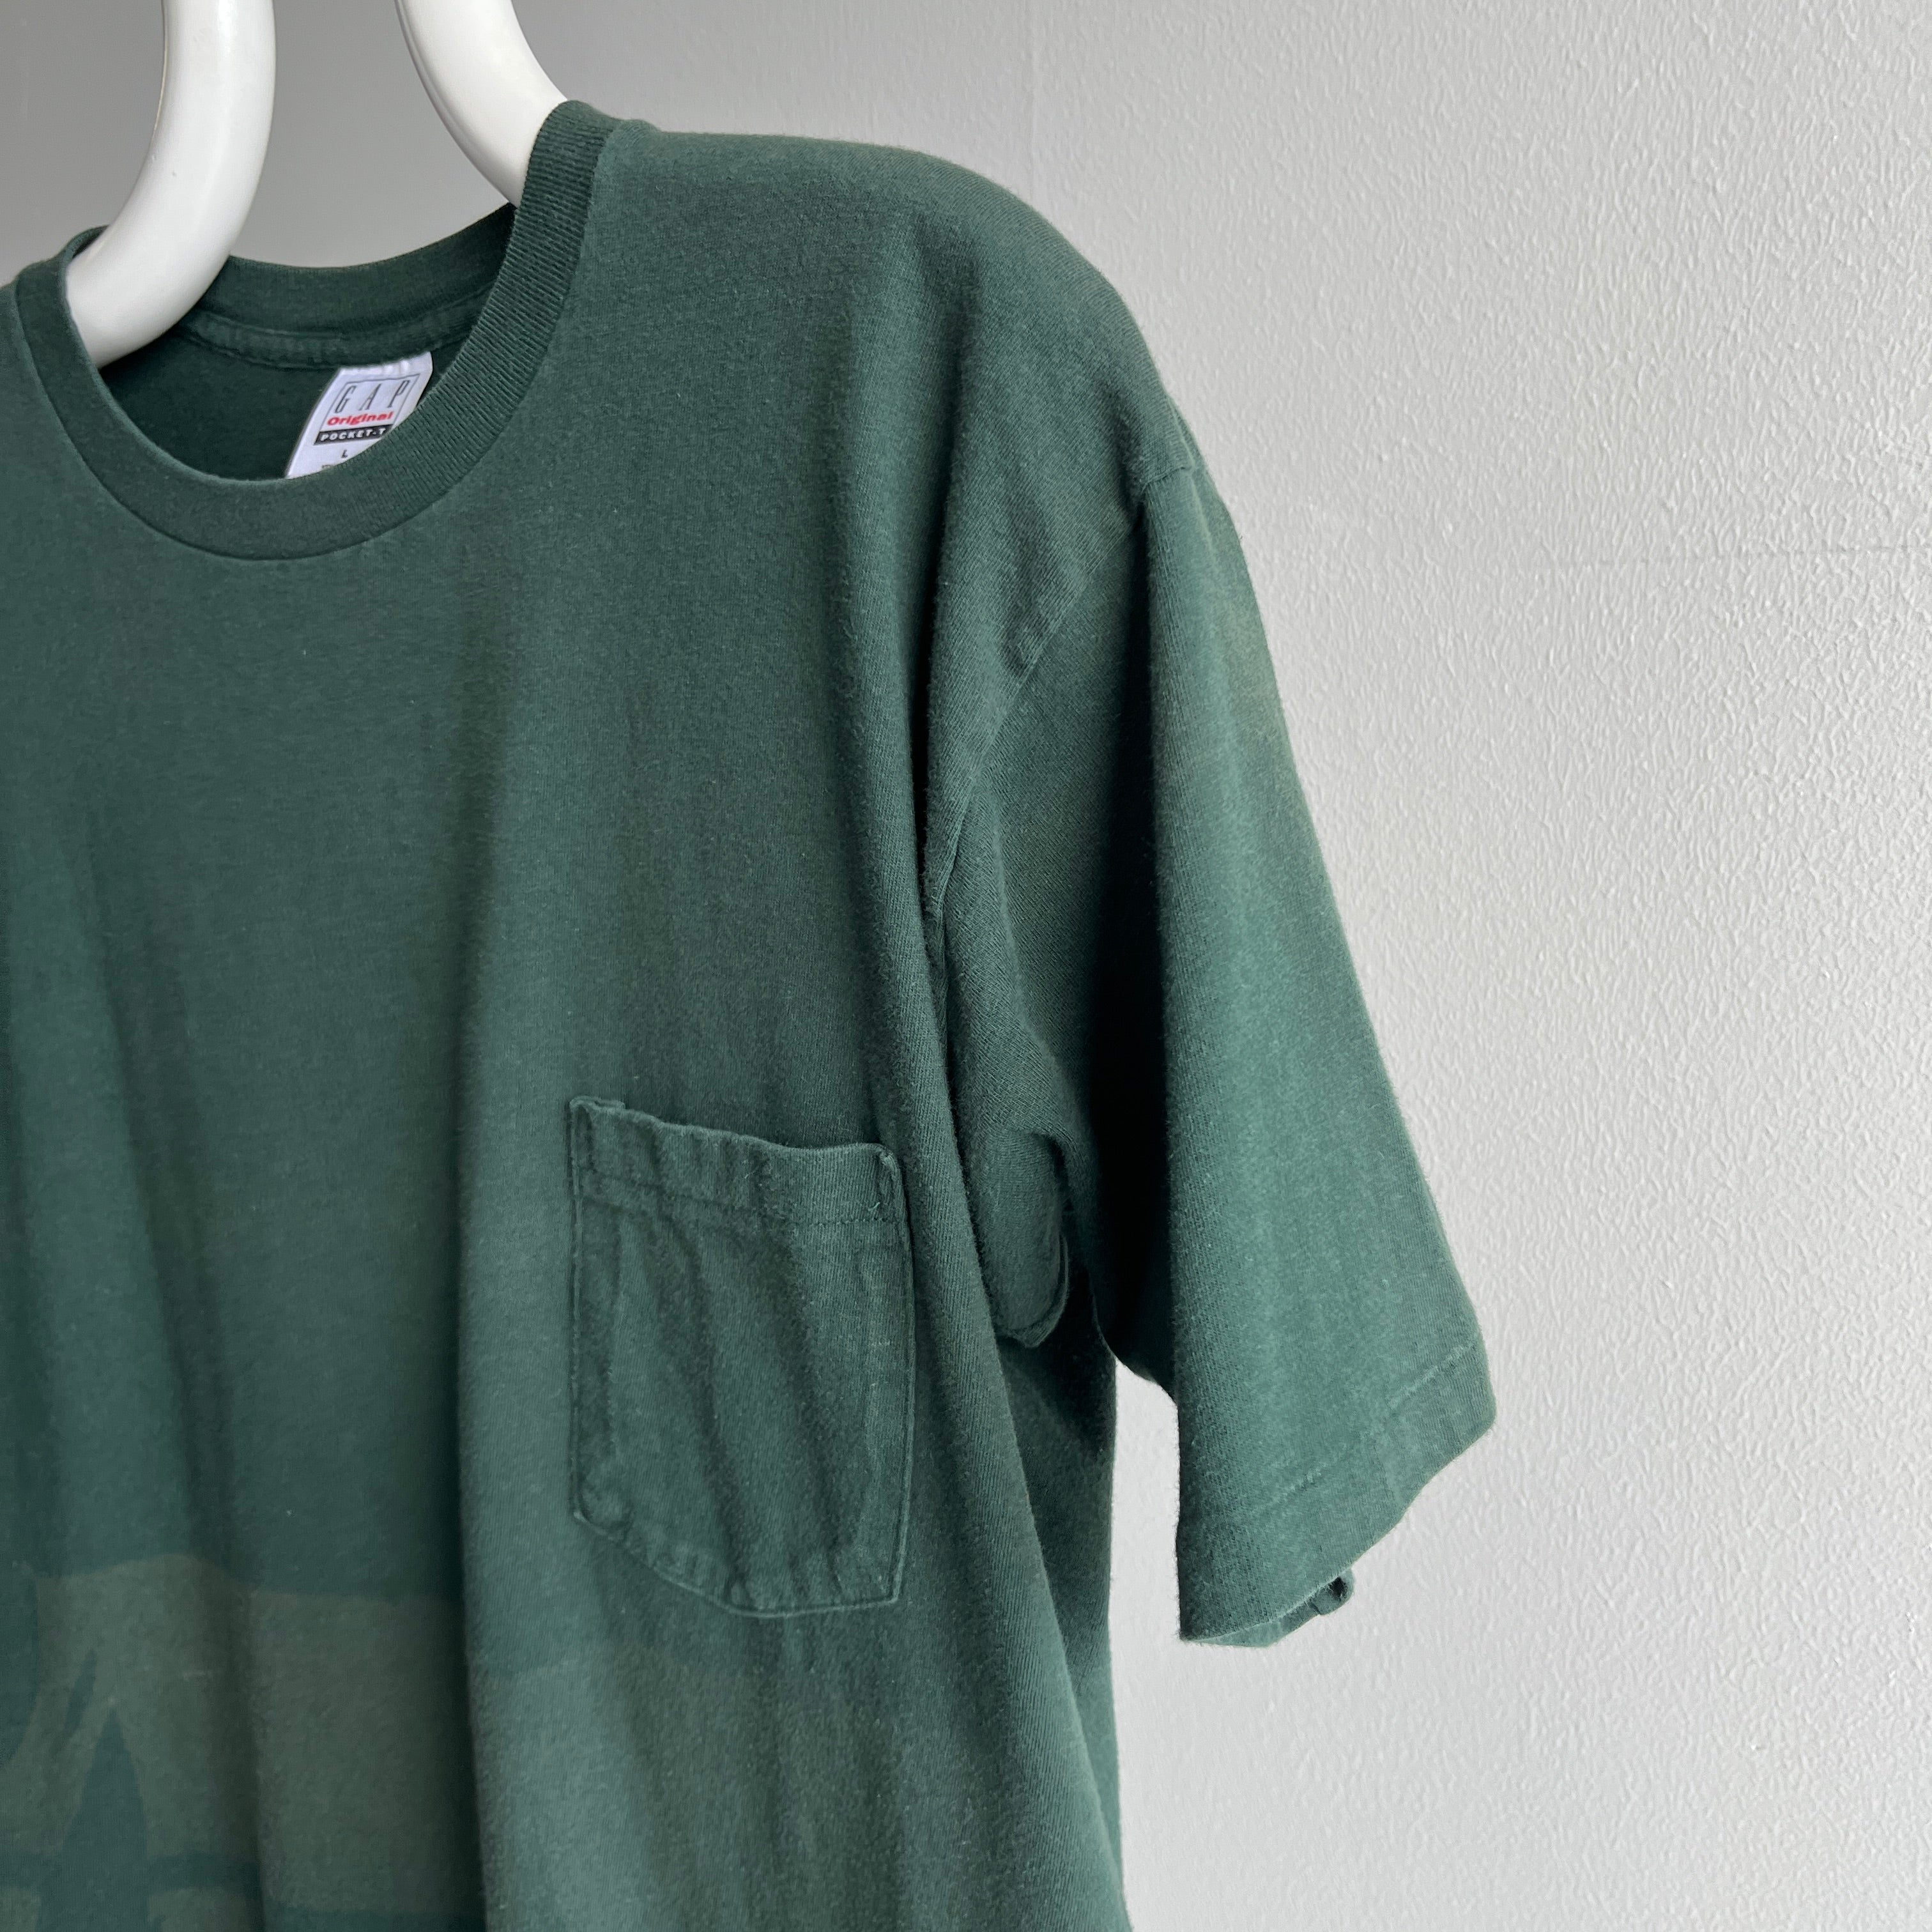 1990s Epically Sun Faded In the Coolest Pattern Forest Green USA Made Gap Pocket T-Shirt